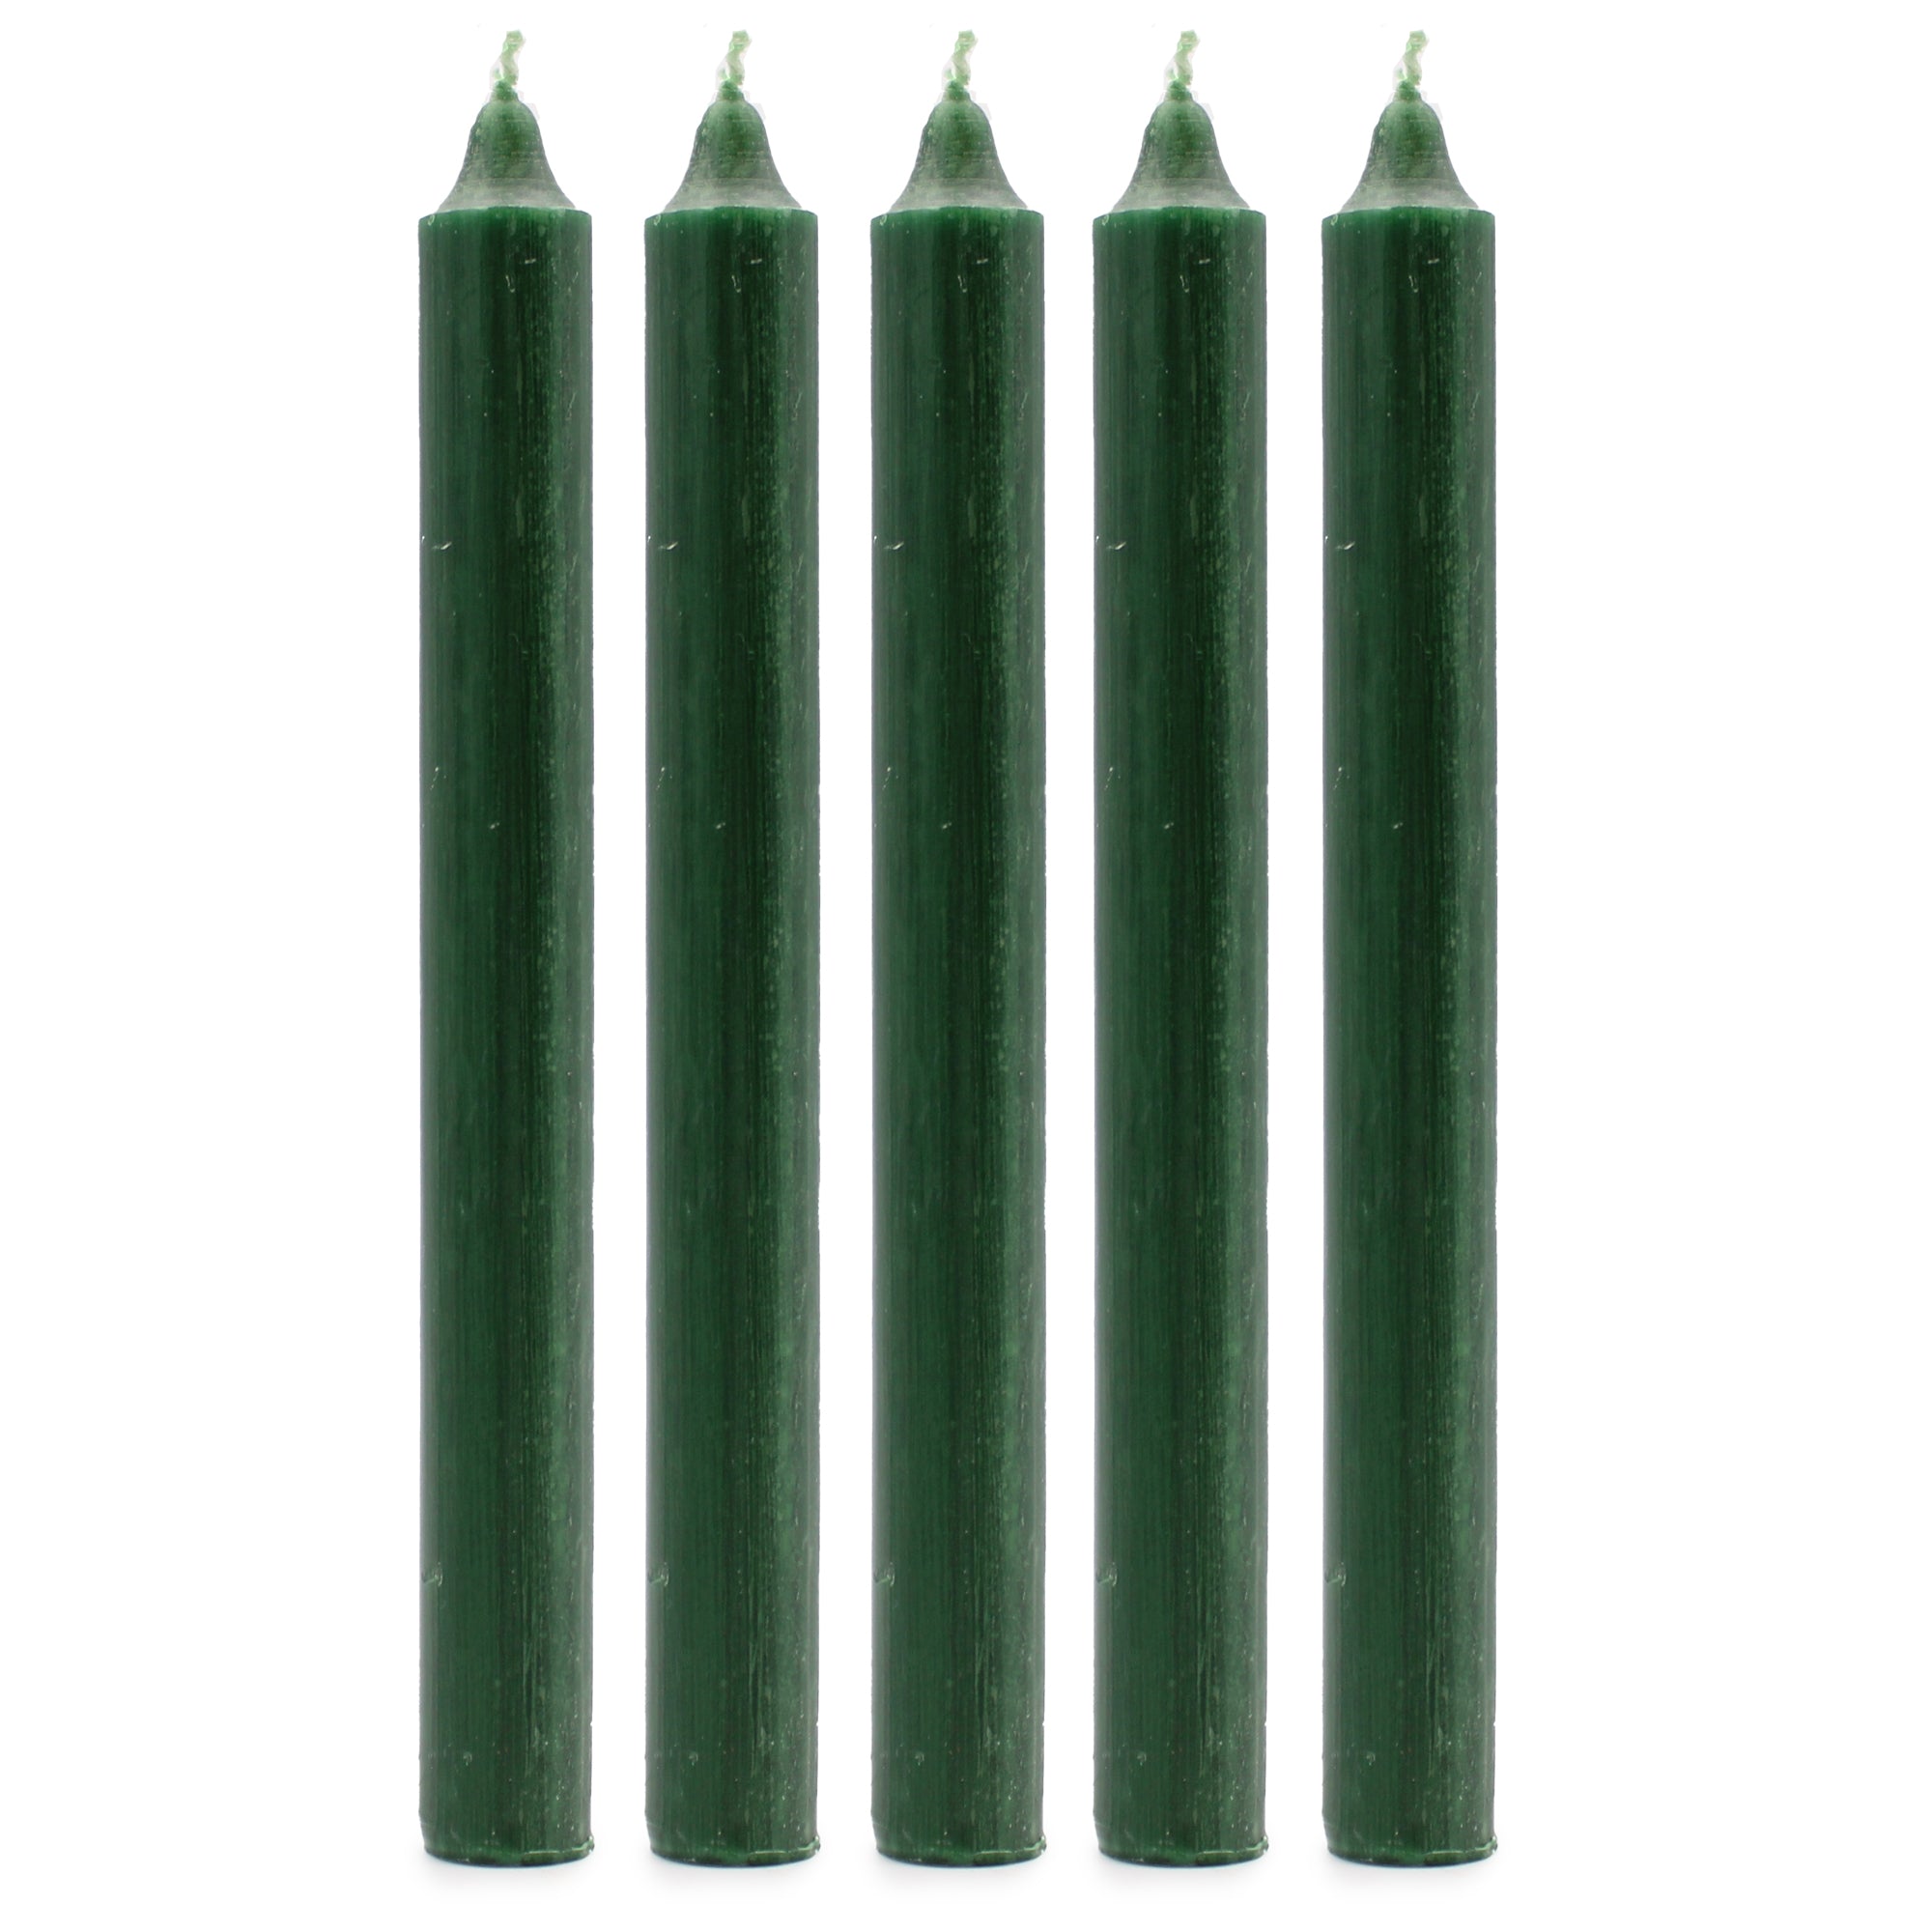 View Solid Colour Dinner Candles Rustic Holly Green Pack of 5 information